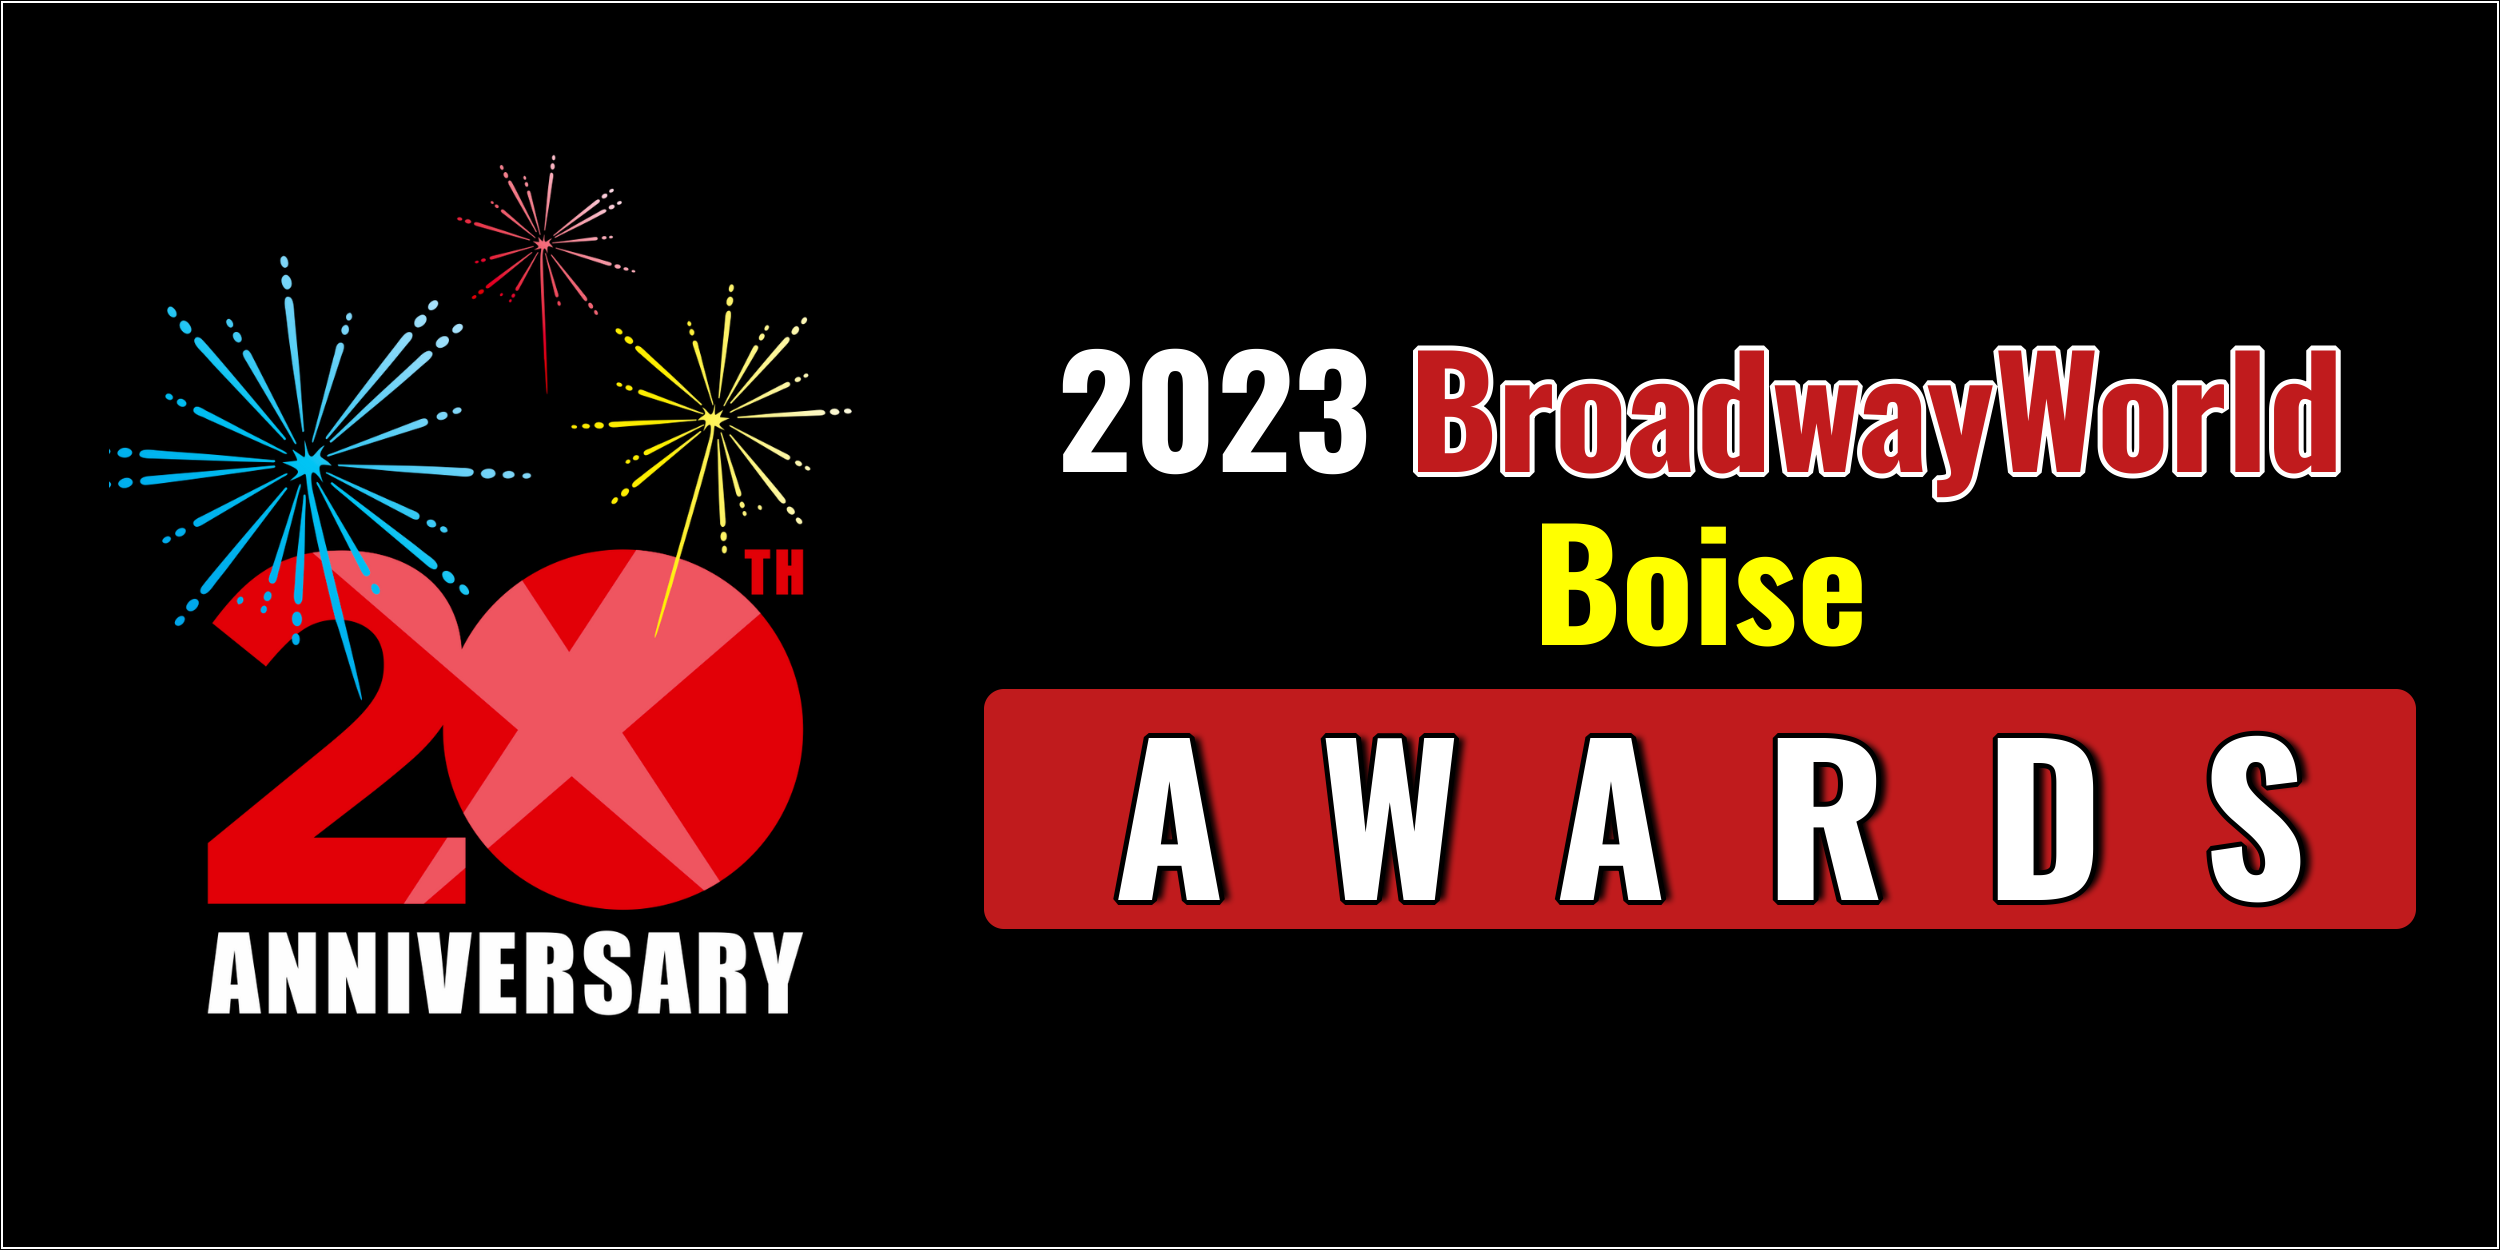 Latest Standings Announced For The 2023 BroadwayWorld Boise Awards; CLUE Leads Best Play!